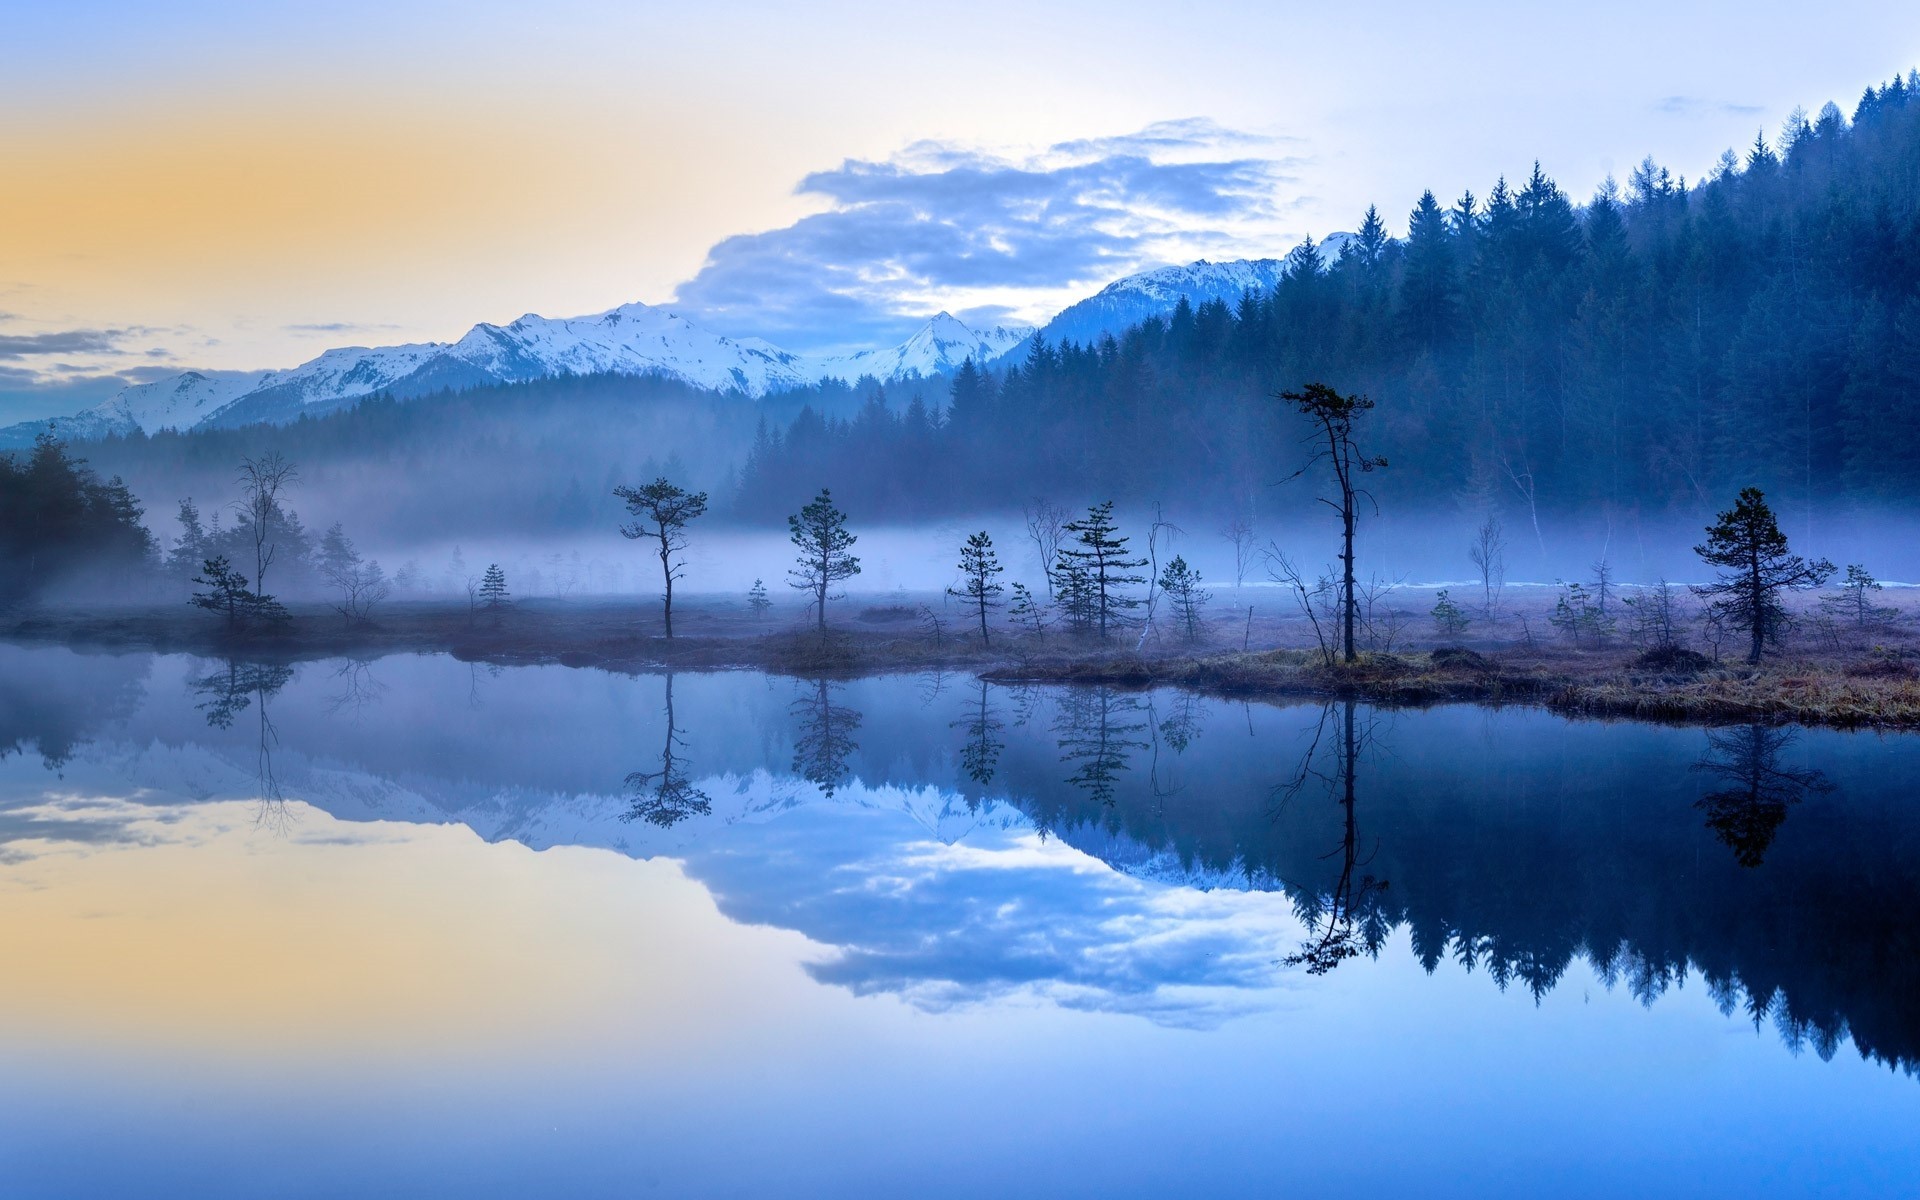 General 1920x1200 nature landscape mist lake forest mountains snowy peak blue water reflection Italy